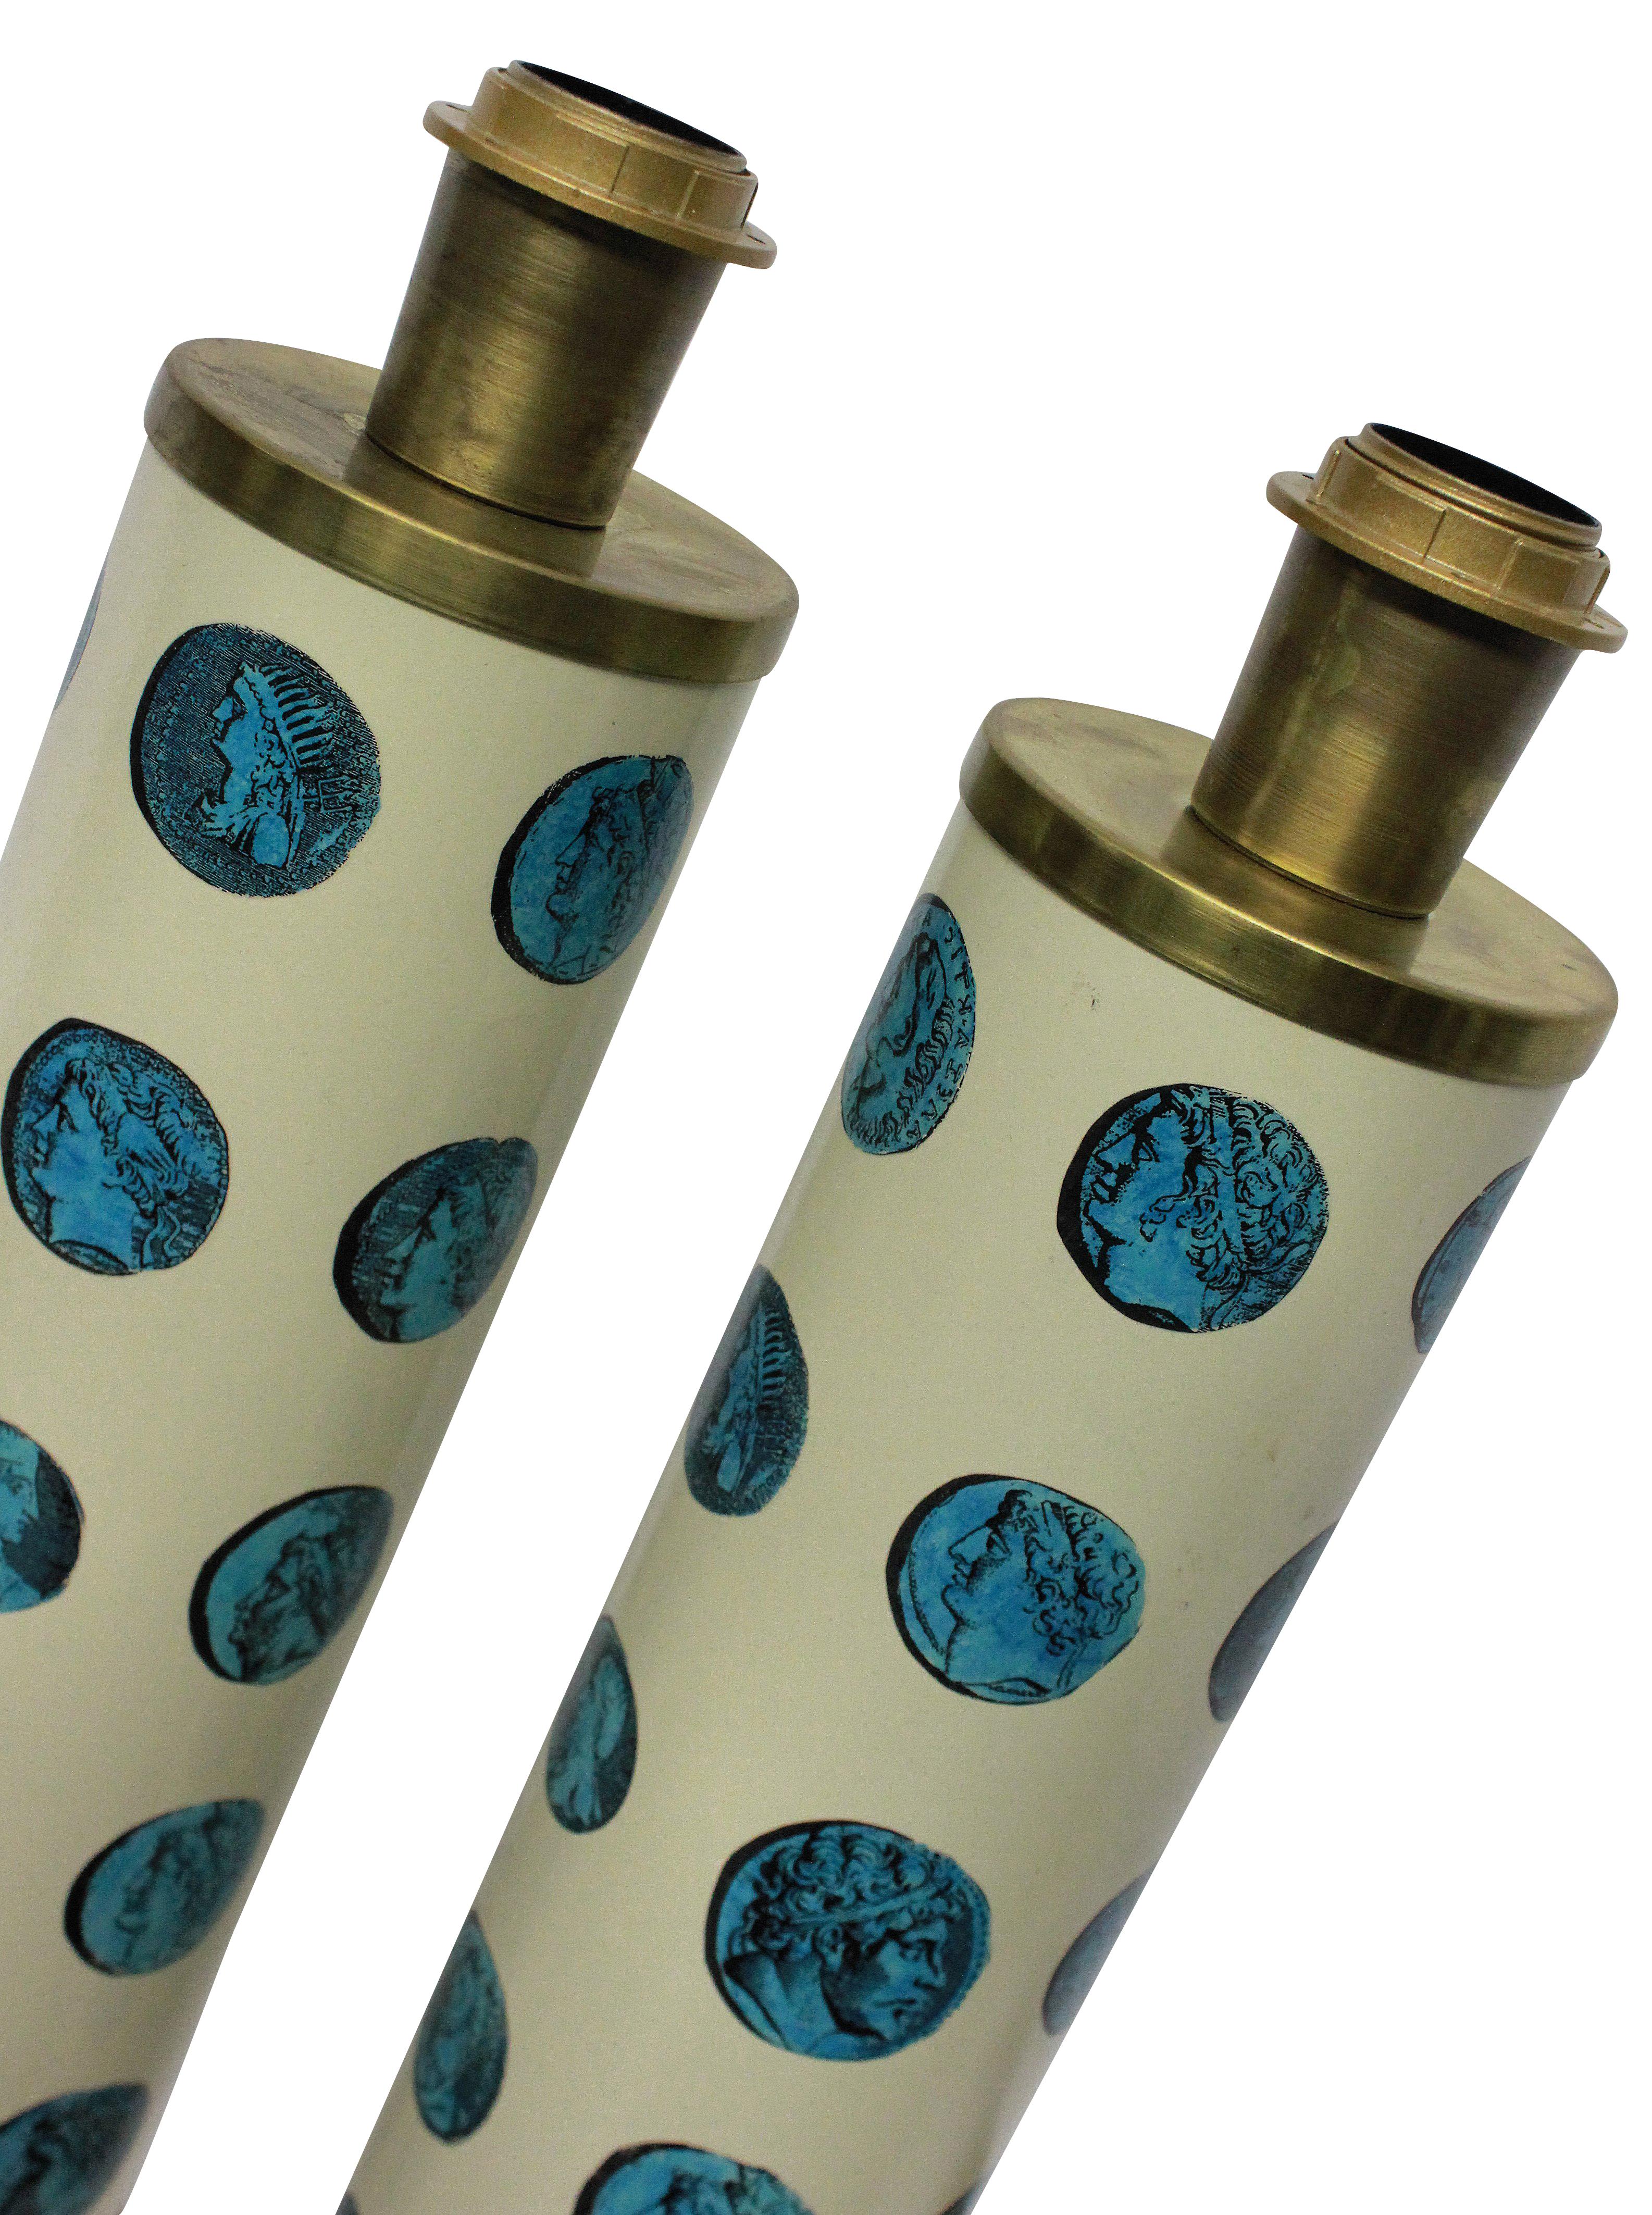 A pair of Fornasetti table lamps in enamel and brass, depicting ancient Roman coins in pale blue on an ivory background.